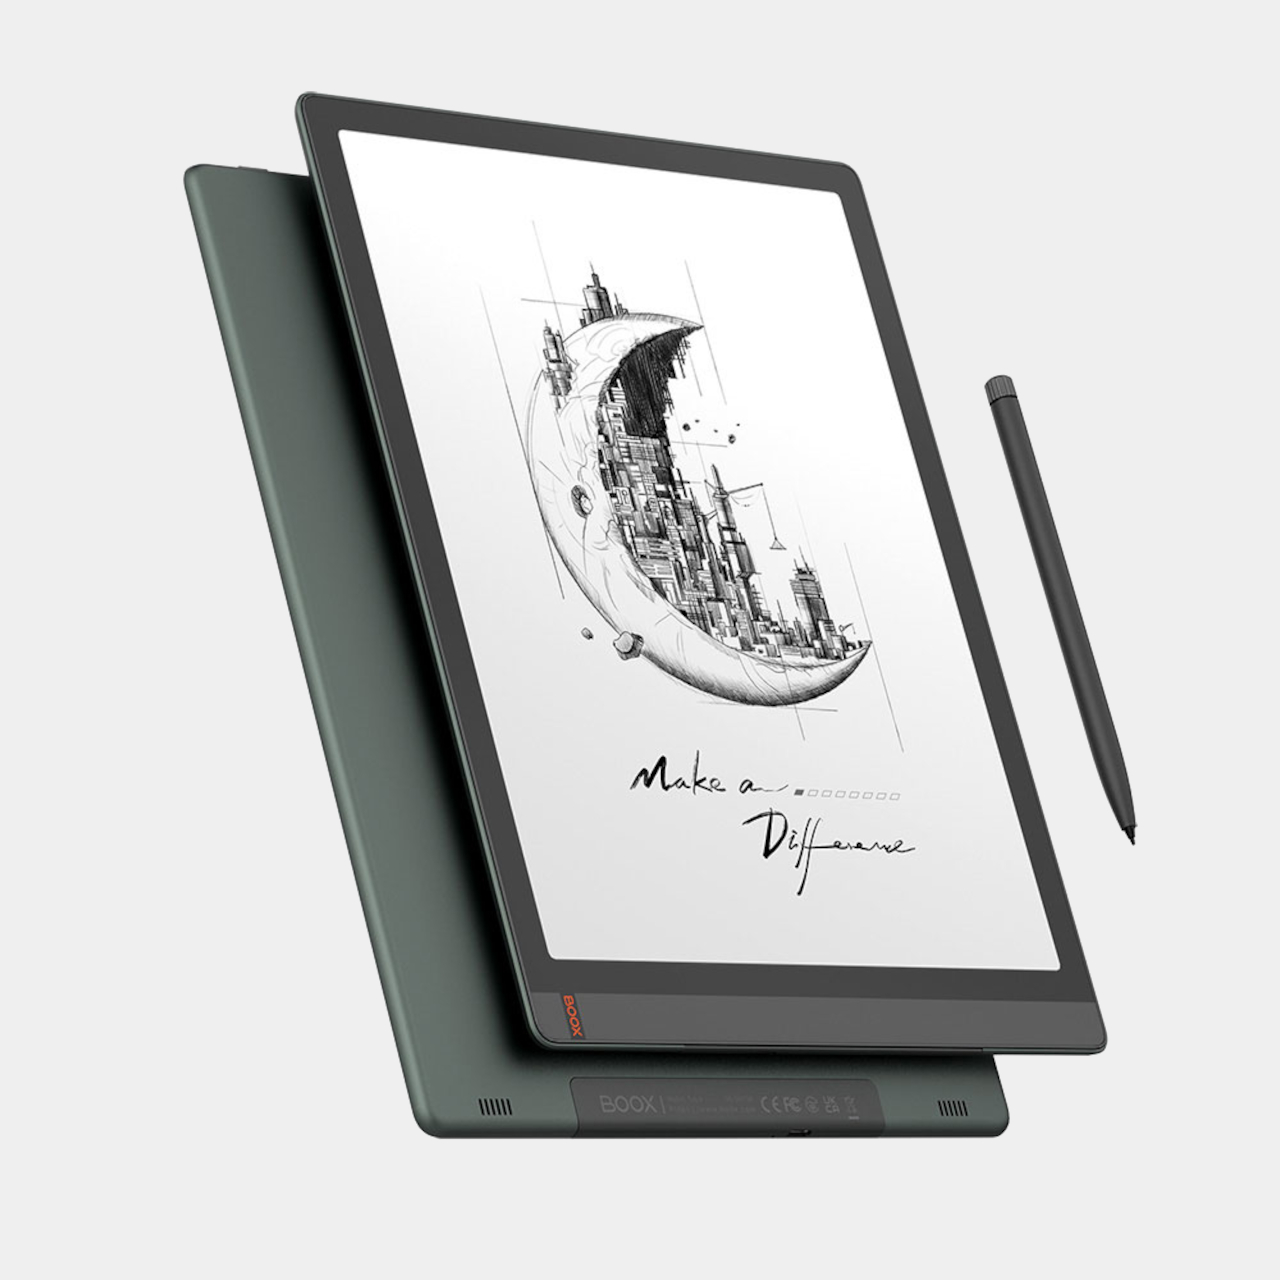 Onyx BOOX Tab X is an Android tablet with a giant E Ink screen